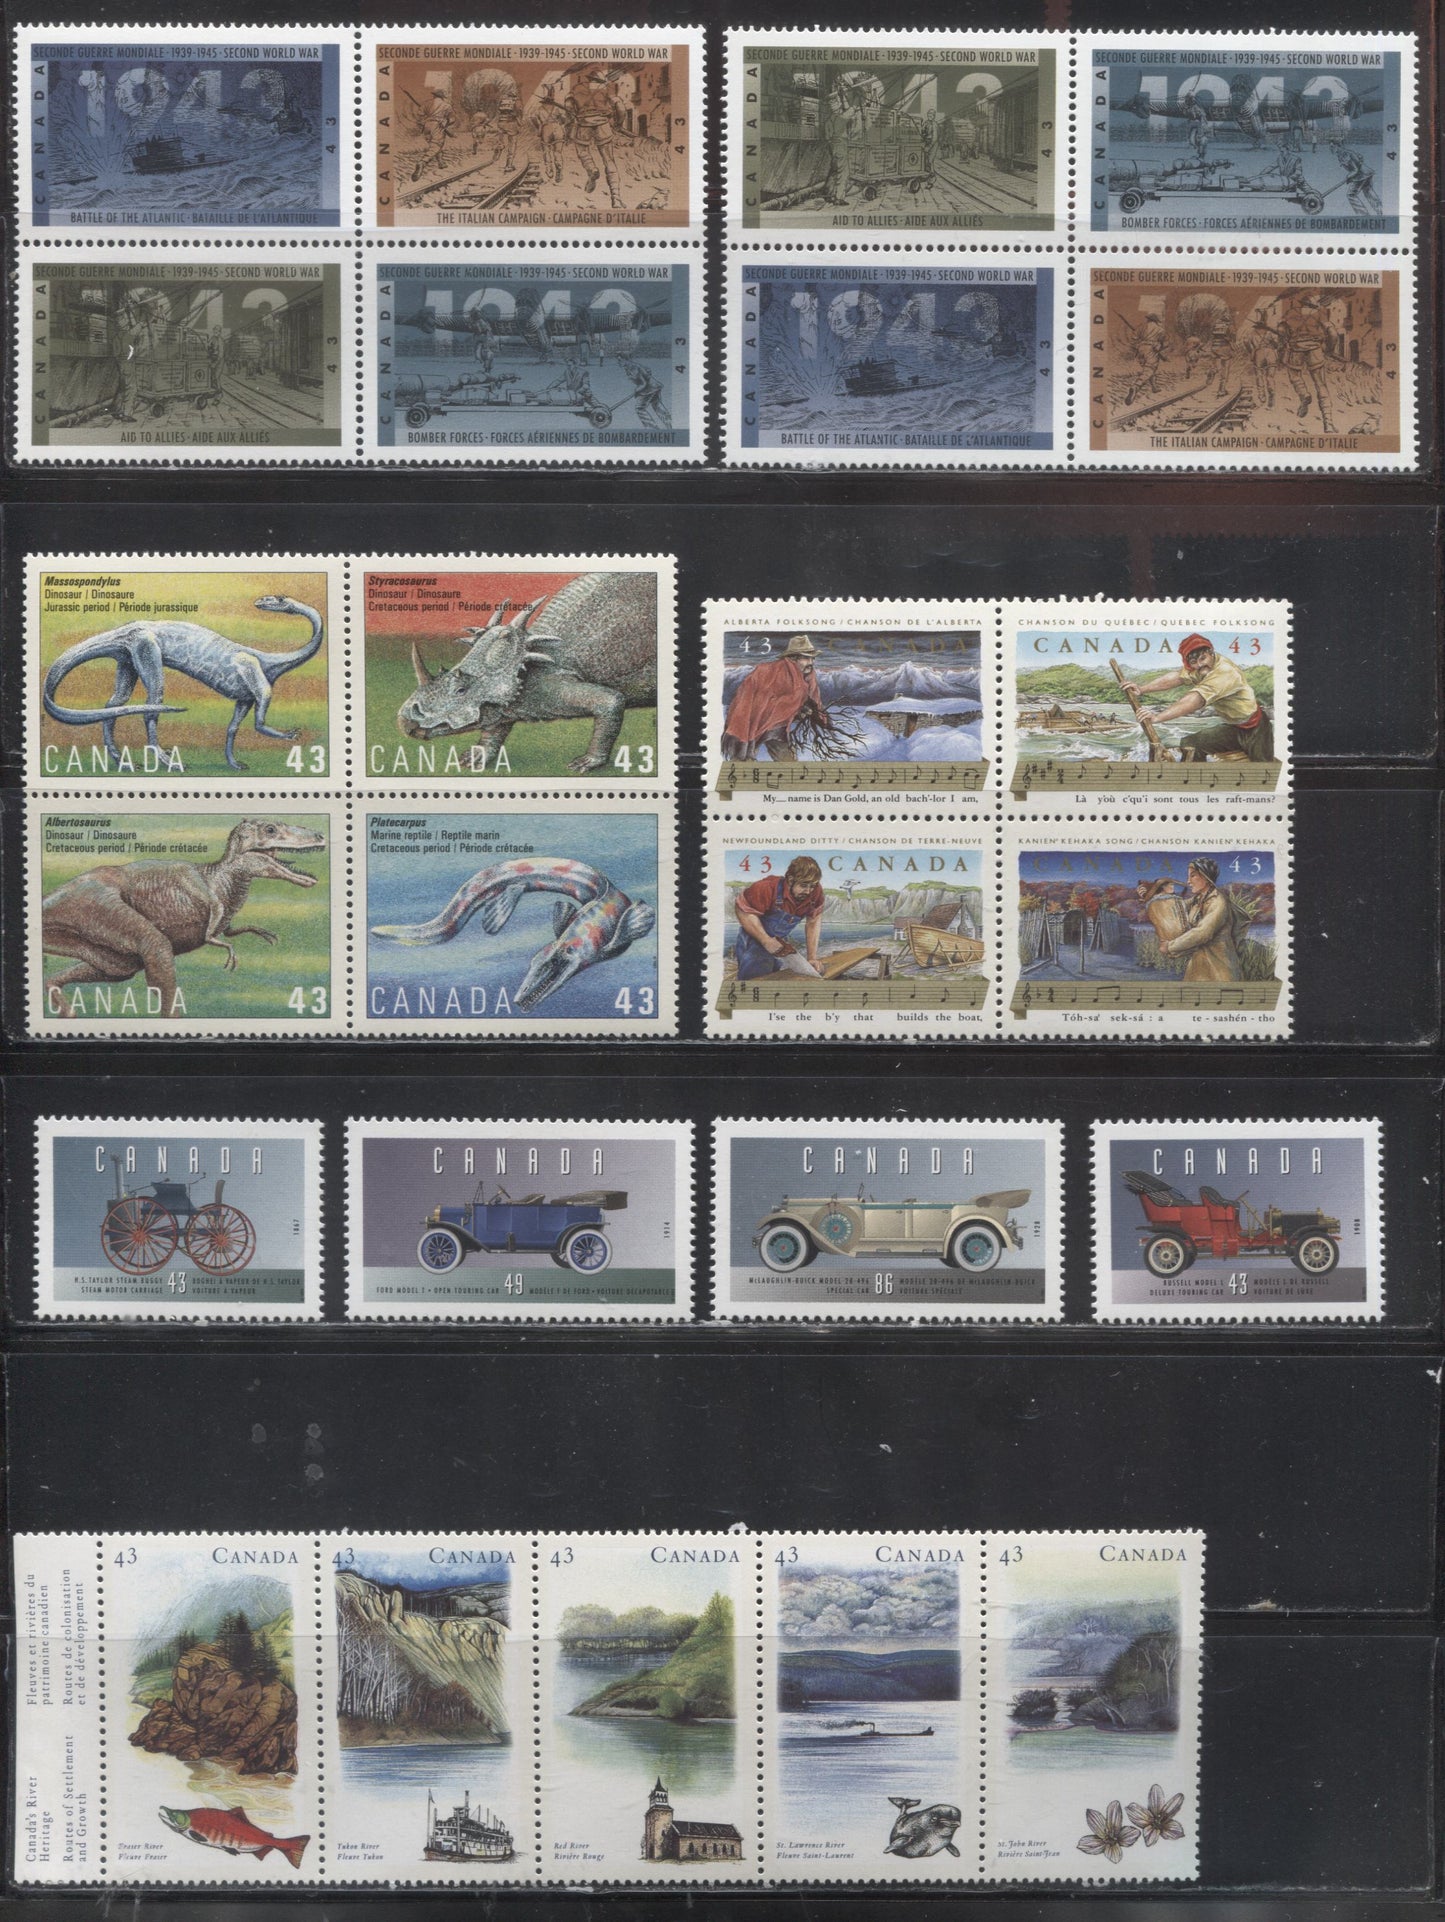 Lot 195 Canada #1484-1506 38c-86c Multicoloured Stamps 1993 Toronto Bicentennial - World War 2 Issues, VFNH Singles, Booklet Singles, Booklet Strip and Se-Tenant Block